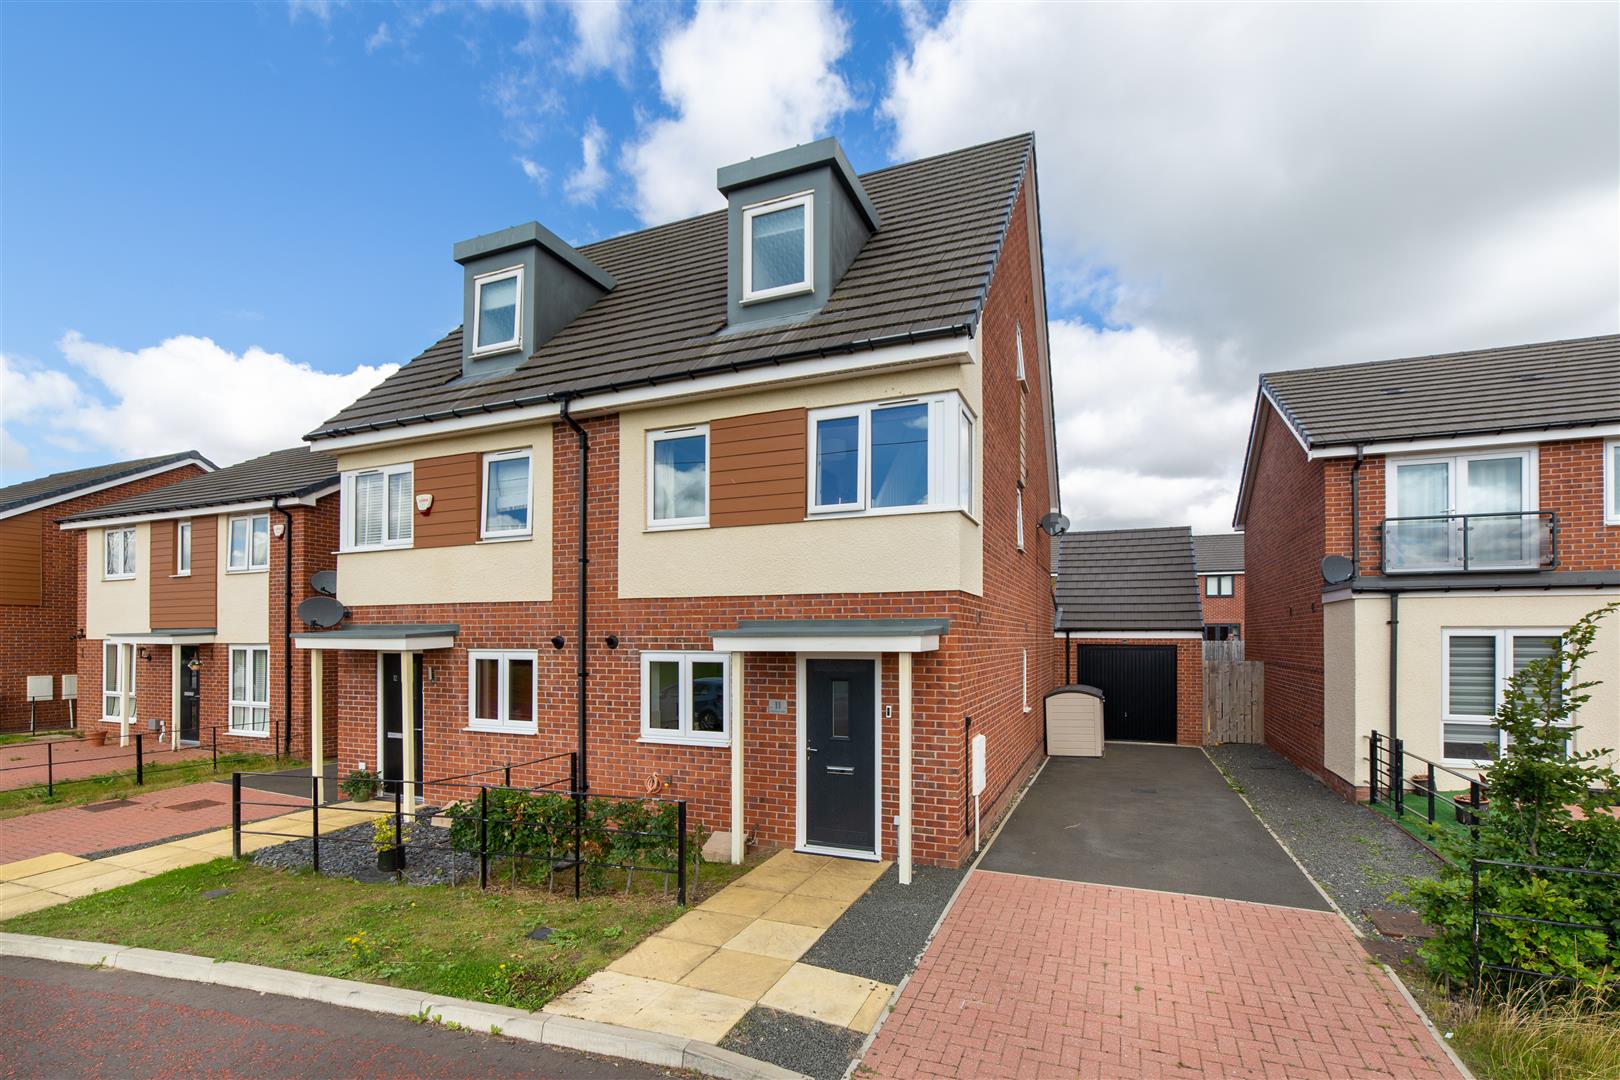 3 bed town house for sale in Shotton View, Great Park, NE13